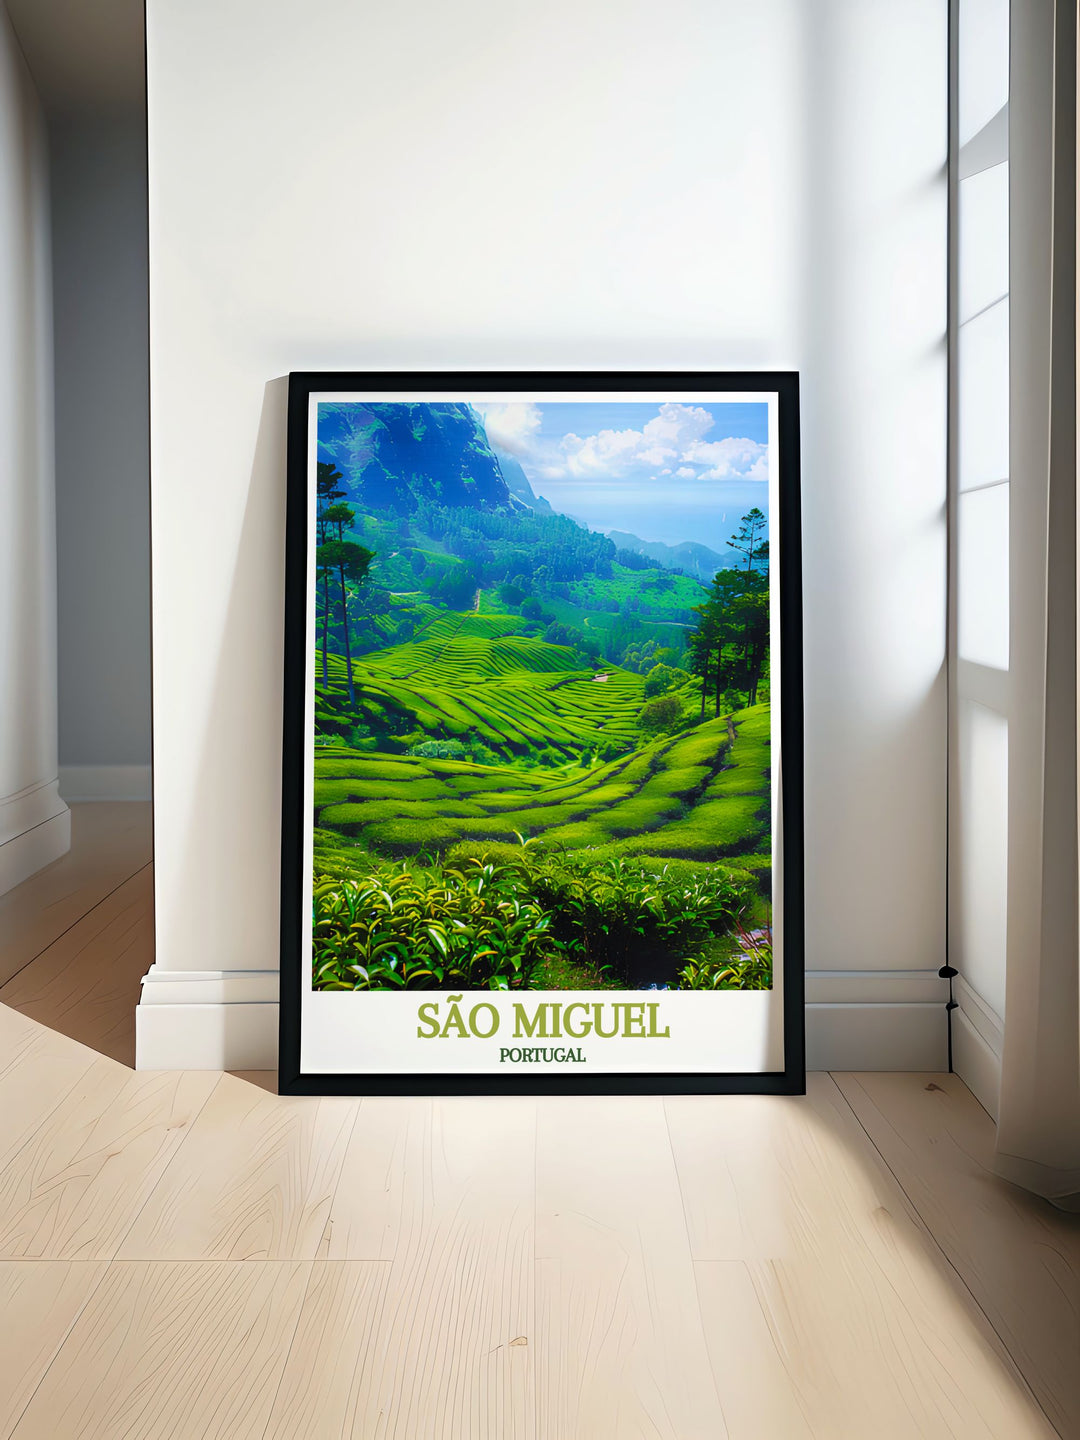 Experience the serene beauty of São Miguel with this art print featuring the islands renowned tea plantations, a unique addition to any Portugal themed wall art collection.